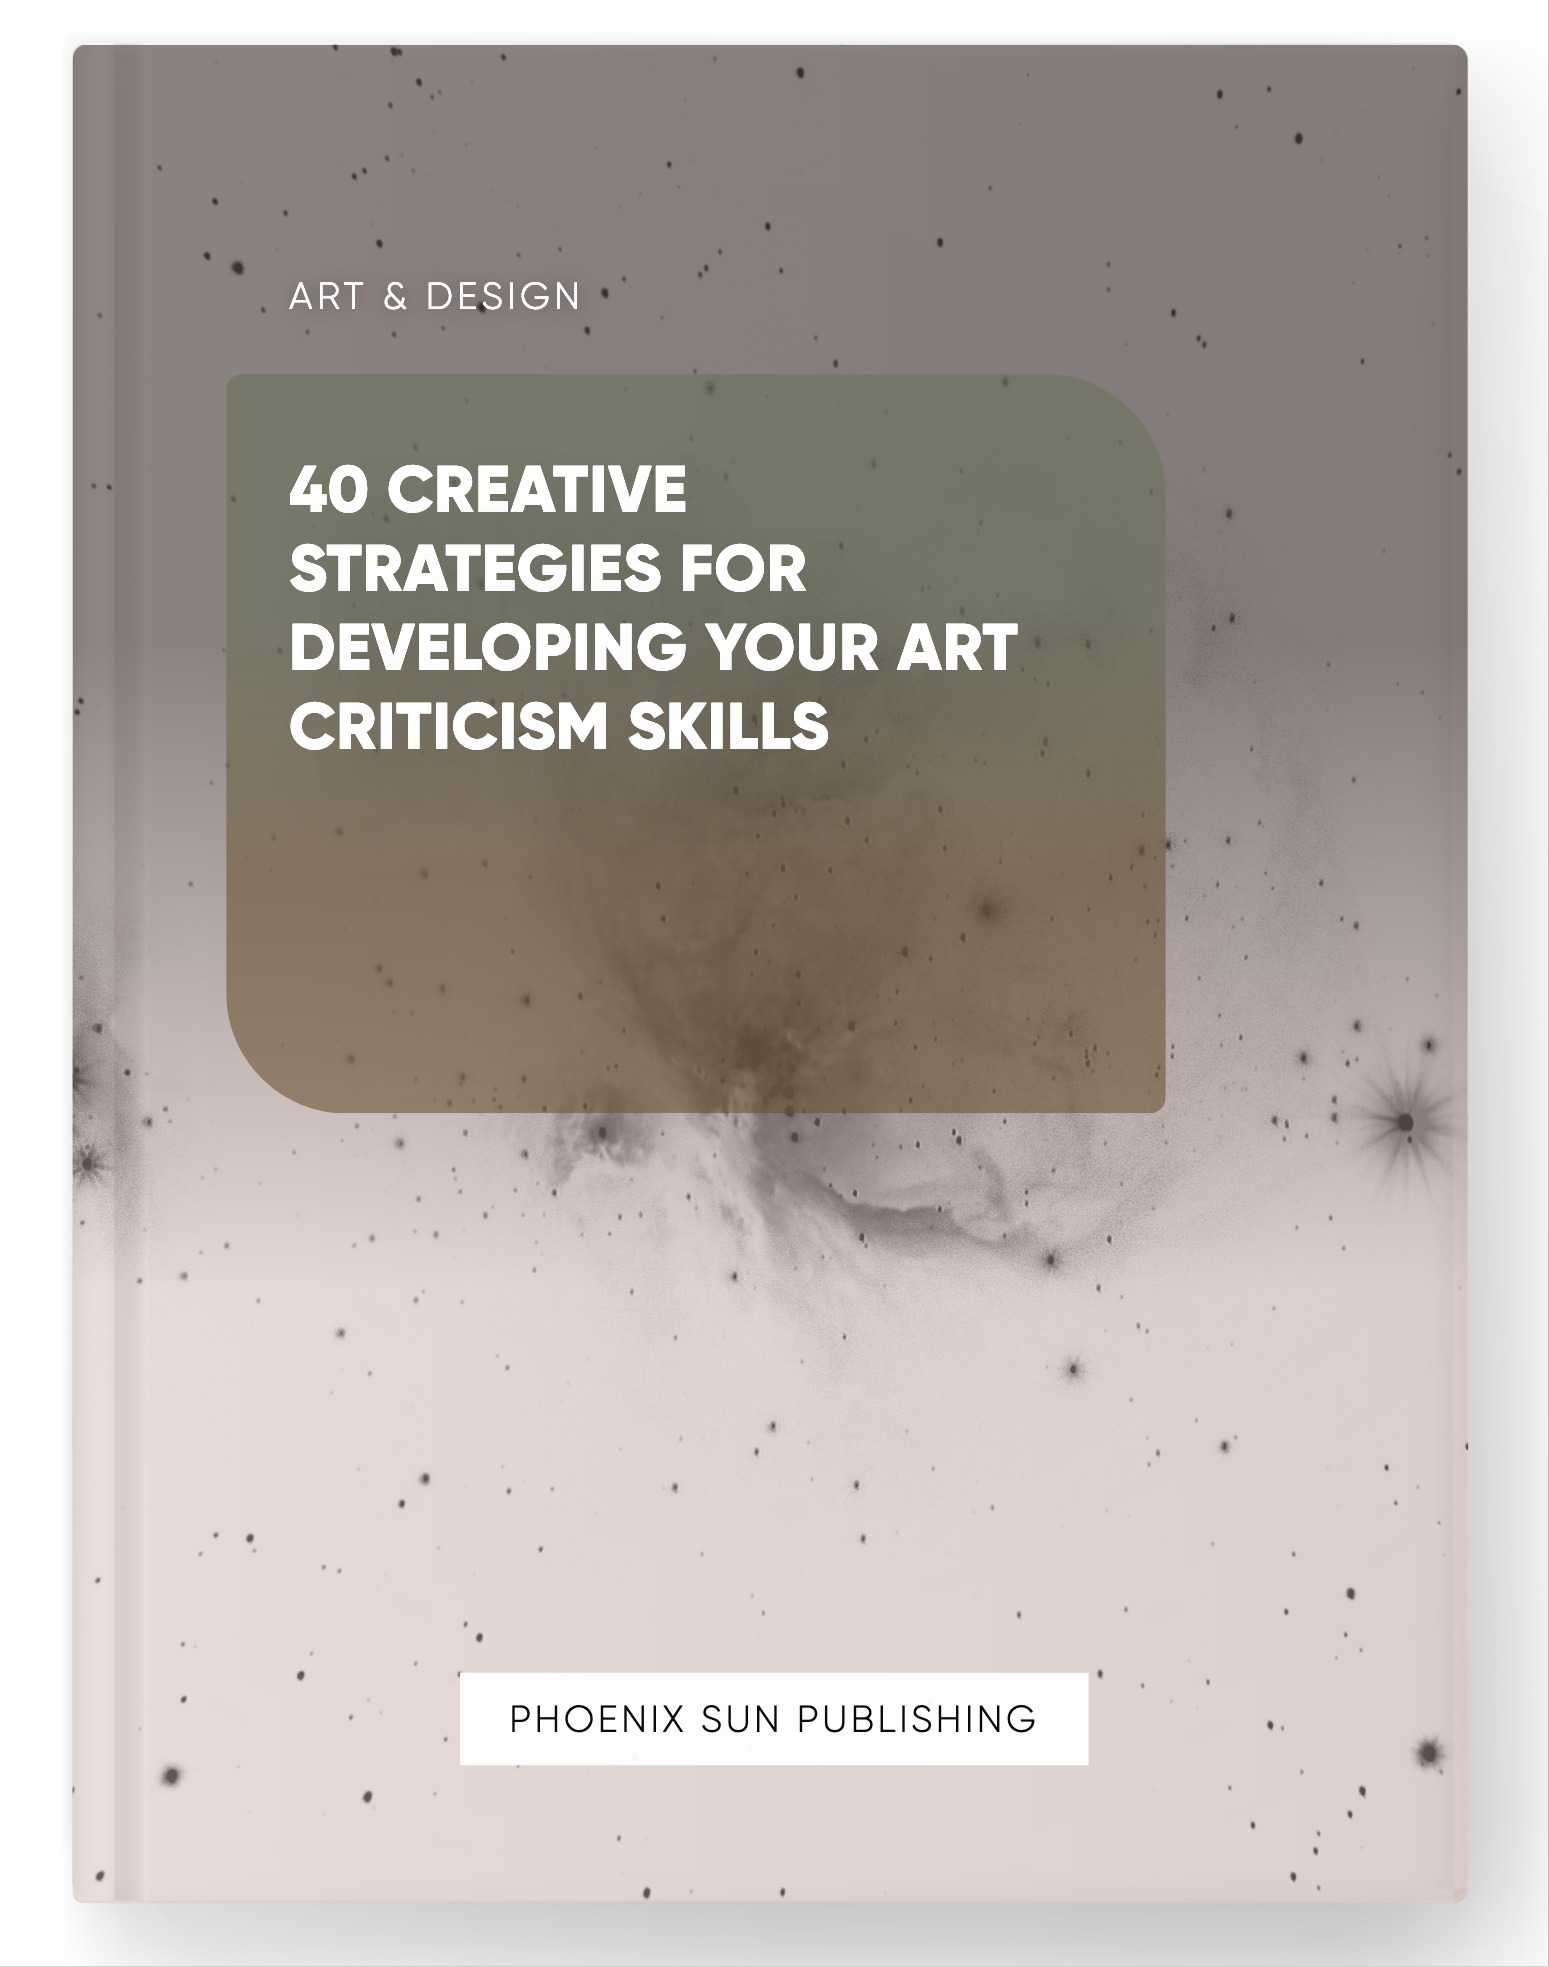 40 Creative Strategies for Developing Your Art Criticism Skills